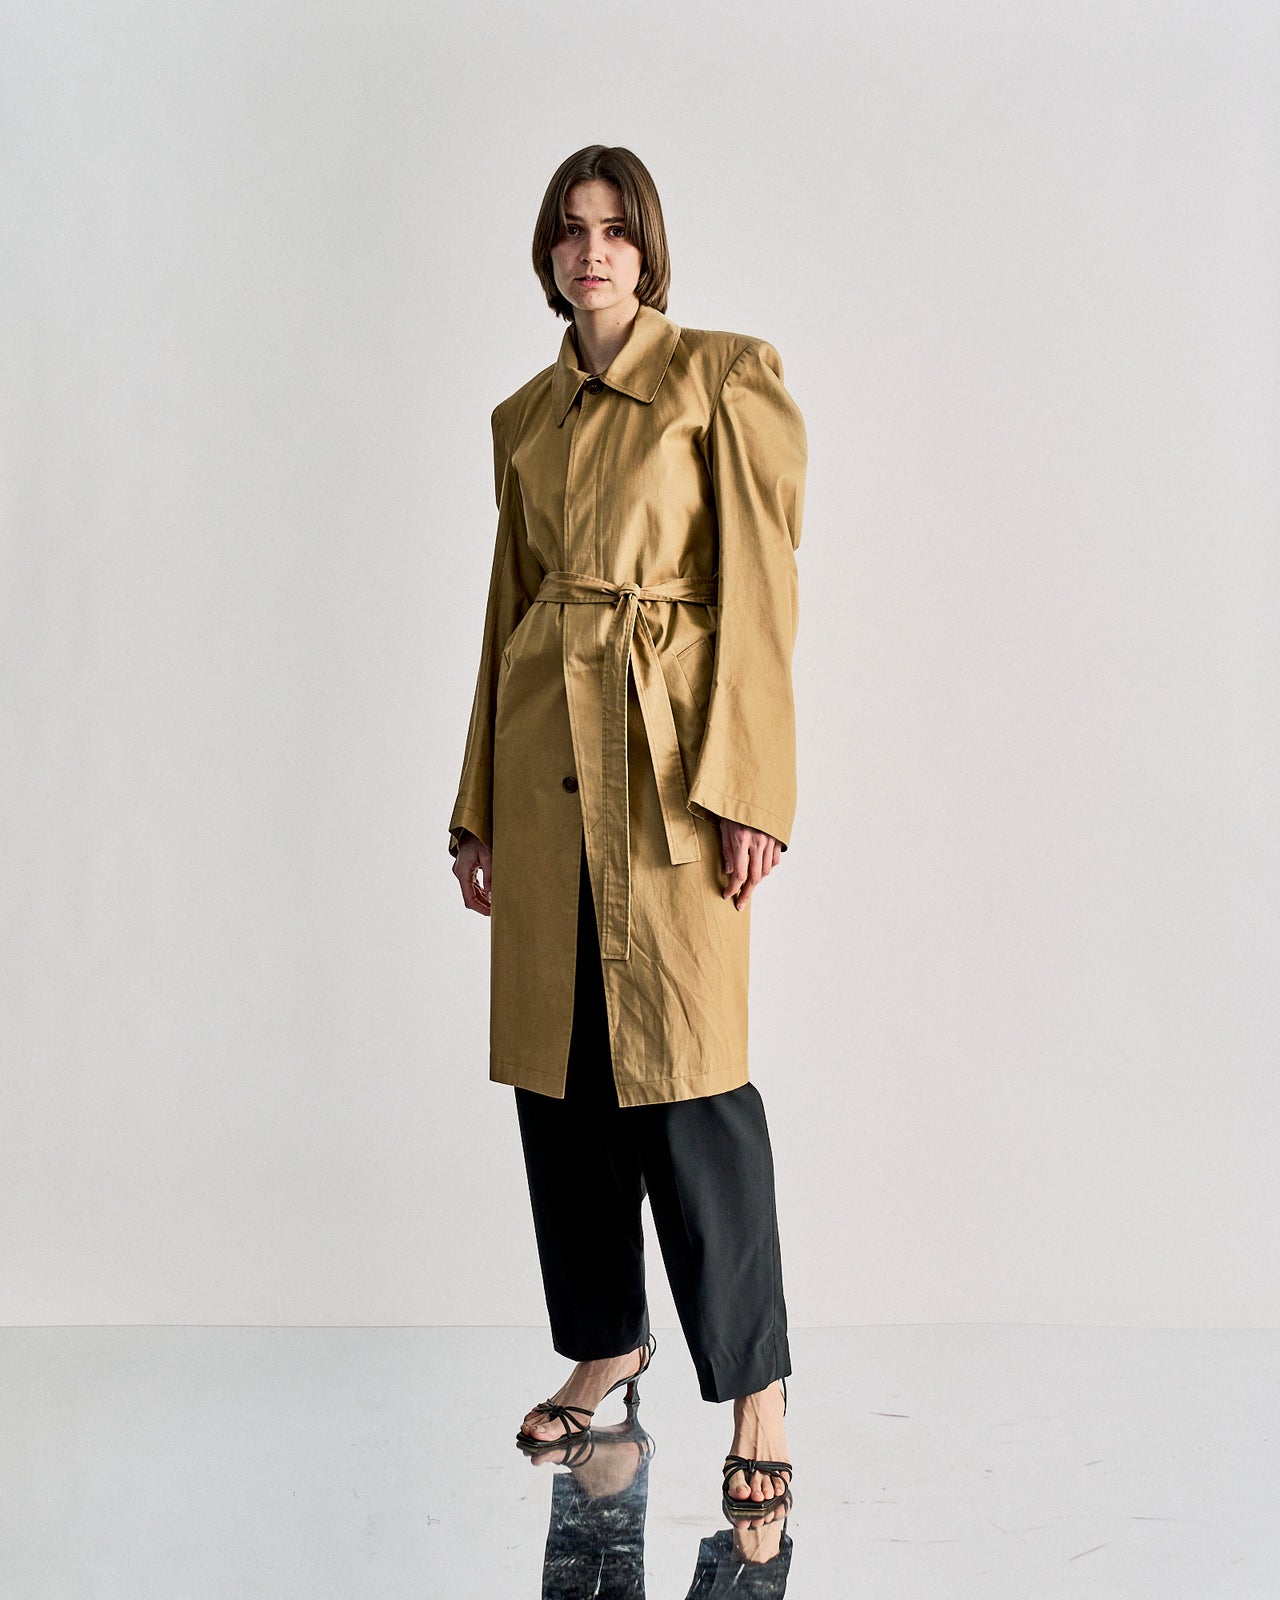 SS 2016 Structured trench coat